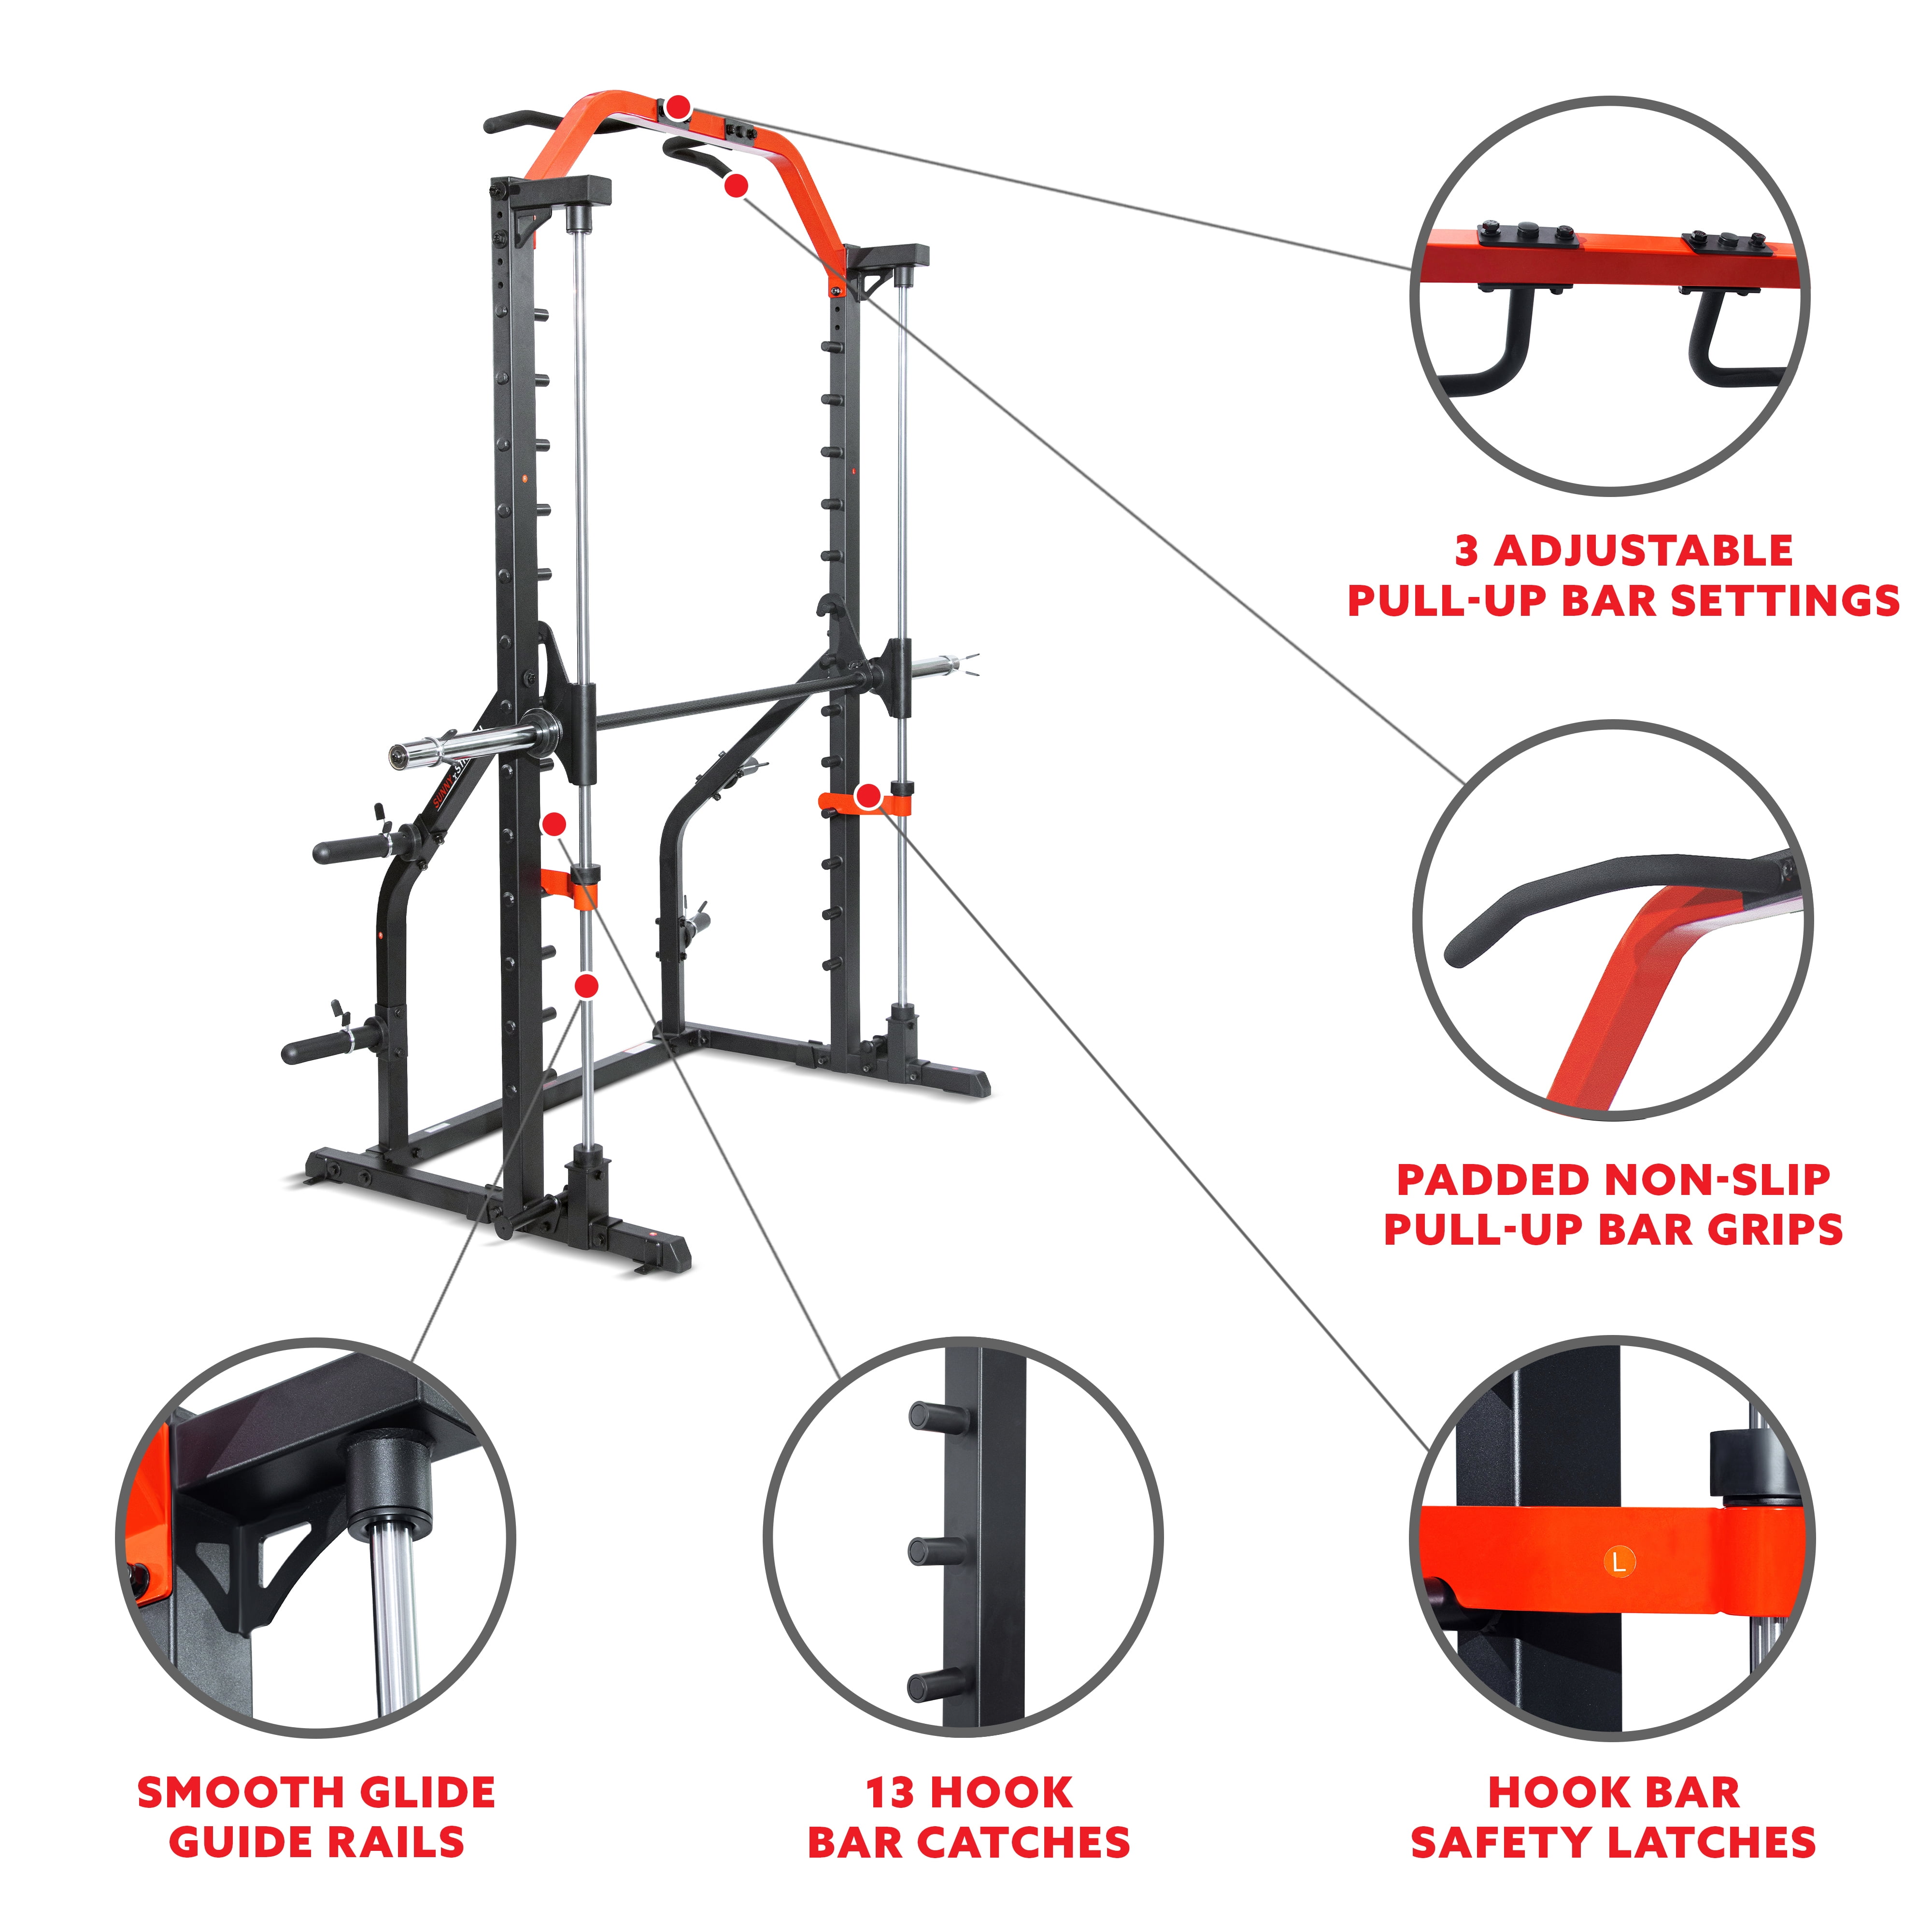 Sunny Health & Fitness 3 1 Premium Home SF-XF920021 in Up Power Rack with Machine Pull Bar Smith Multifunction Adjustable – Squat Gym for 